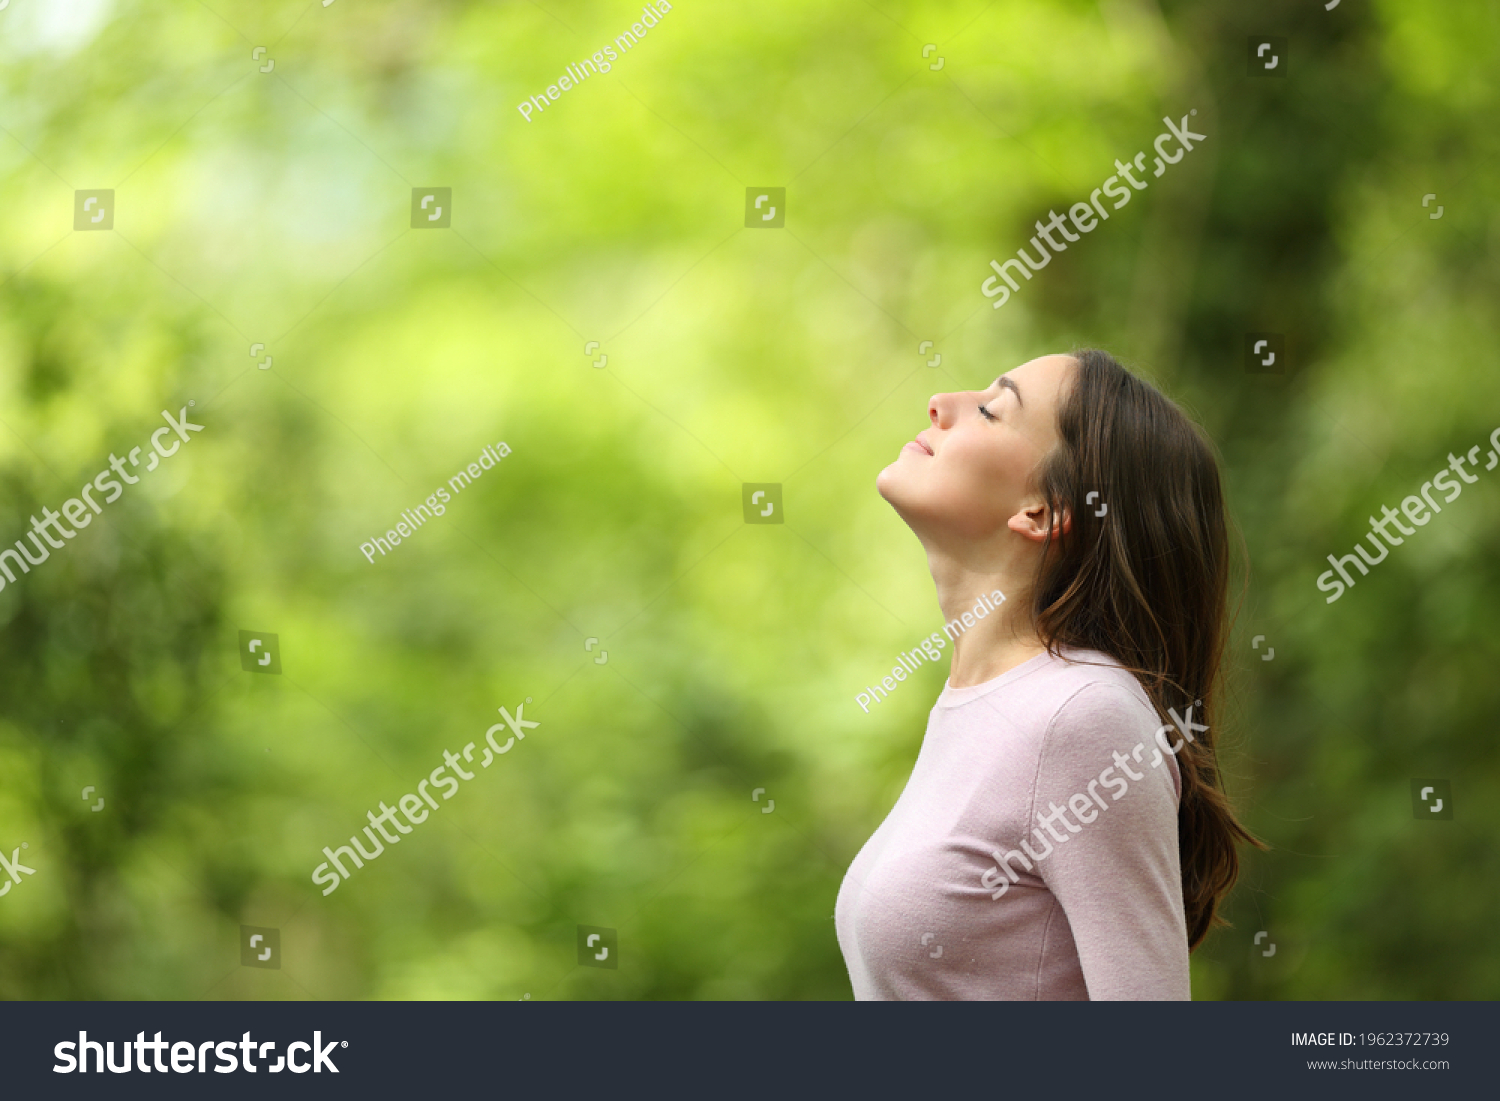 Profile of a relaxed woman breathing fresh air in a green forest #1962372739